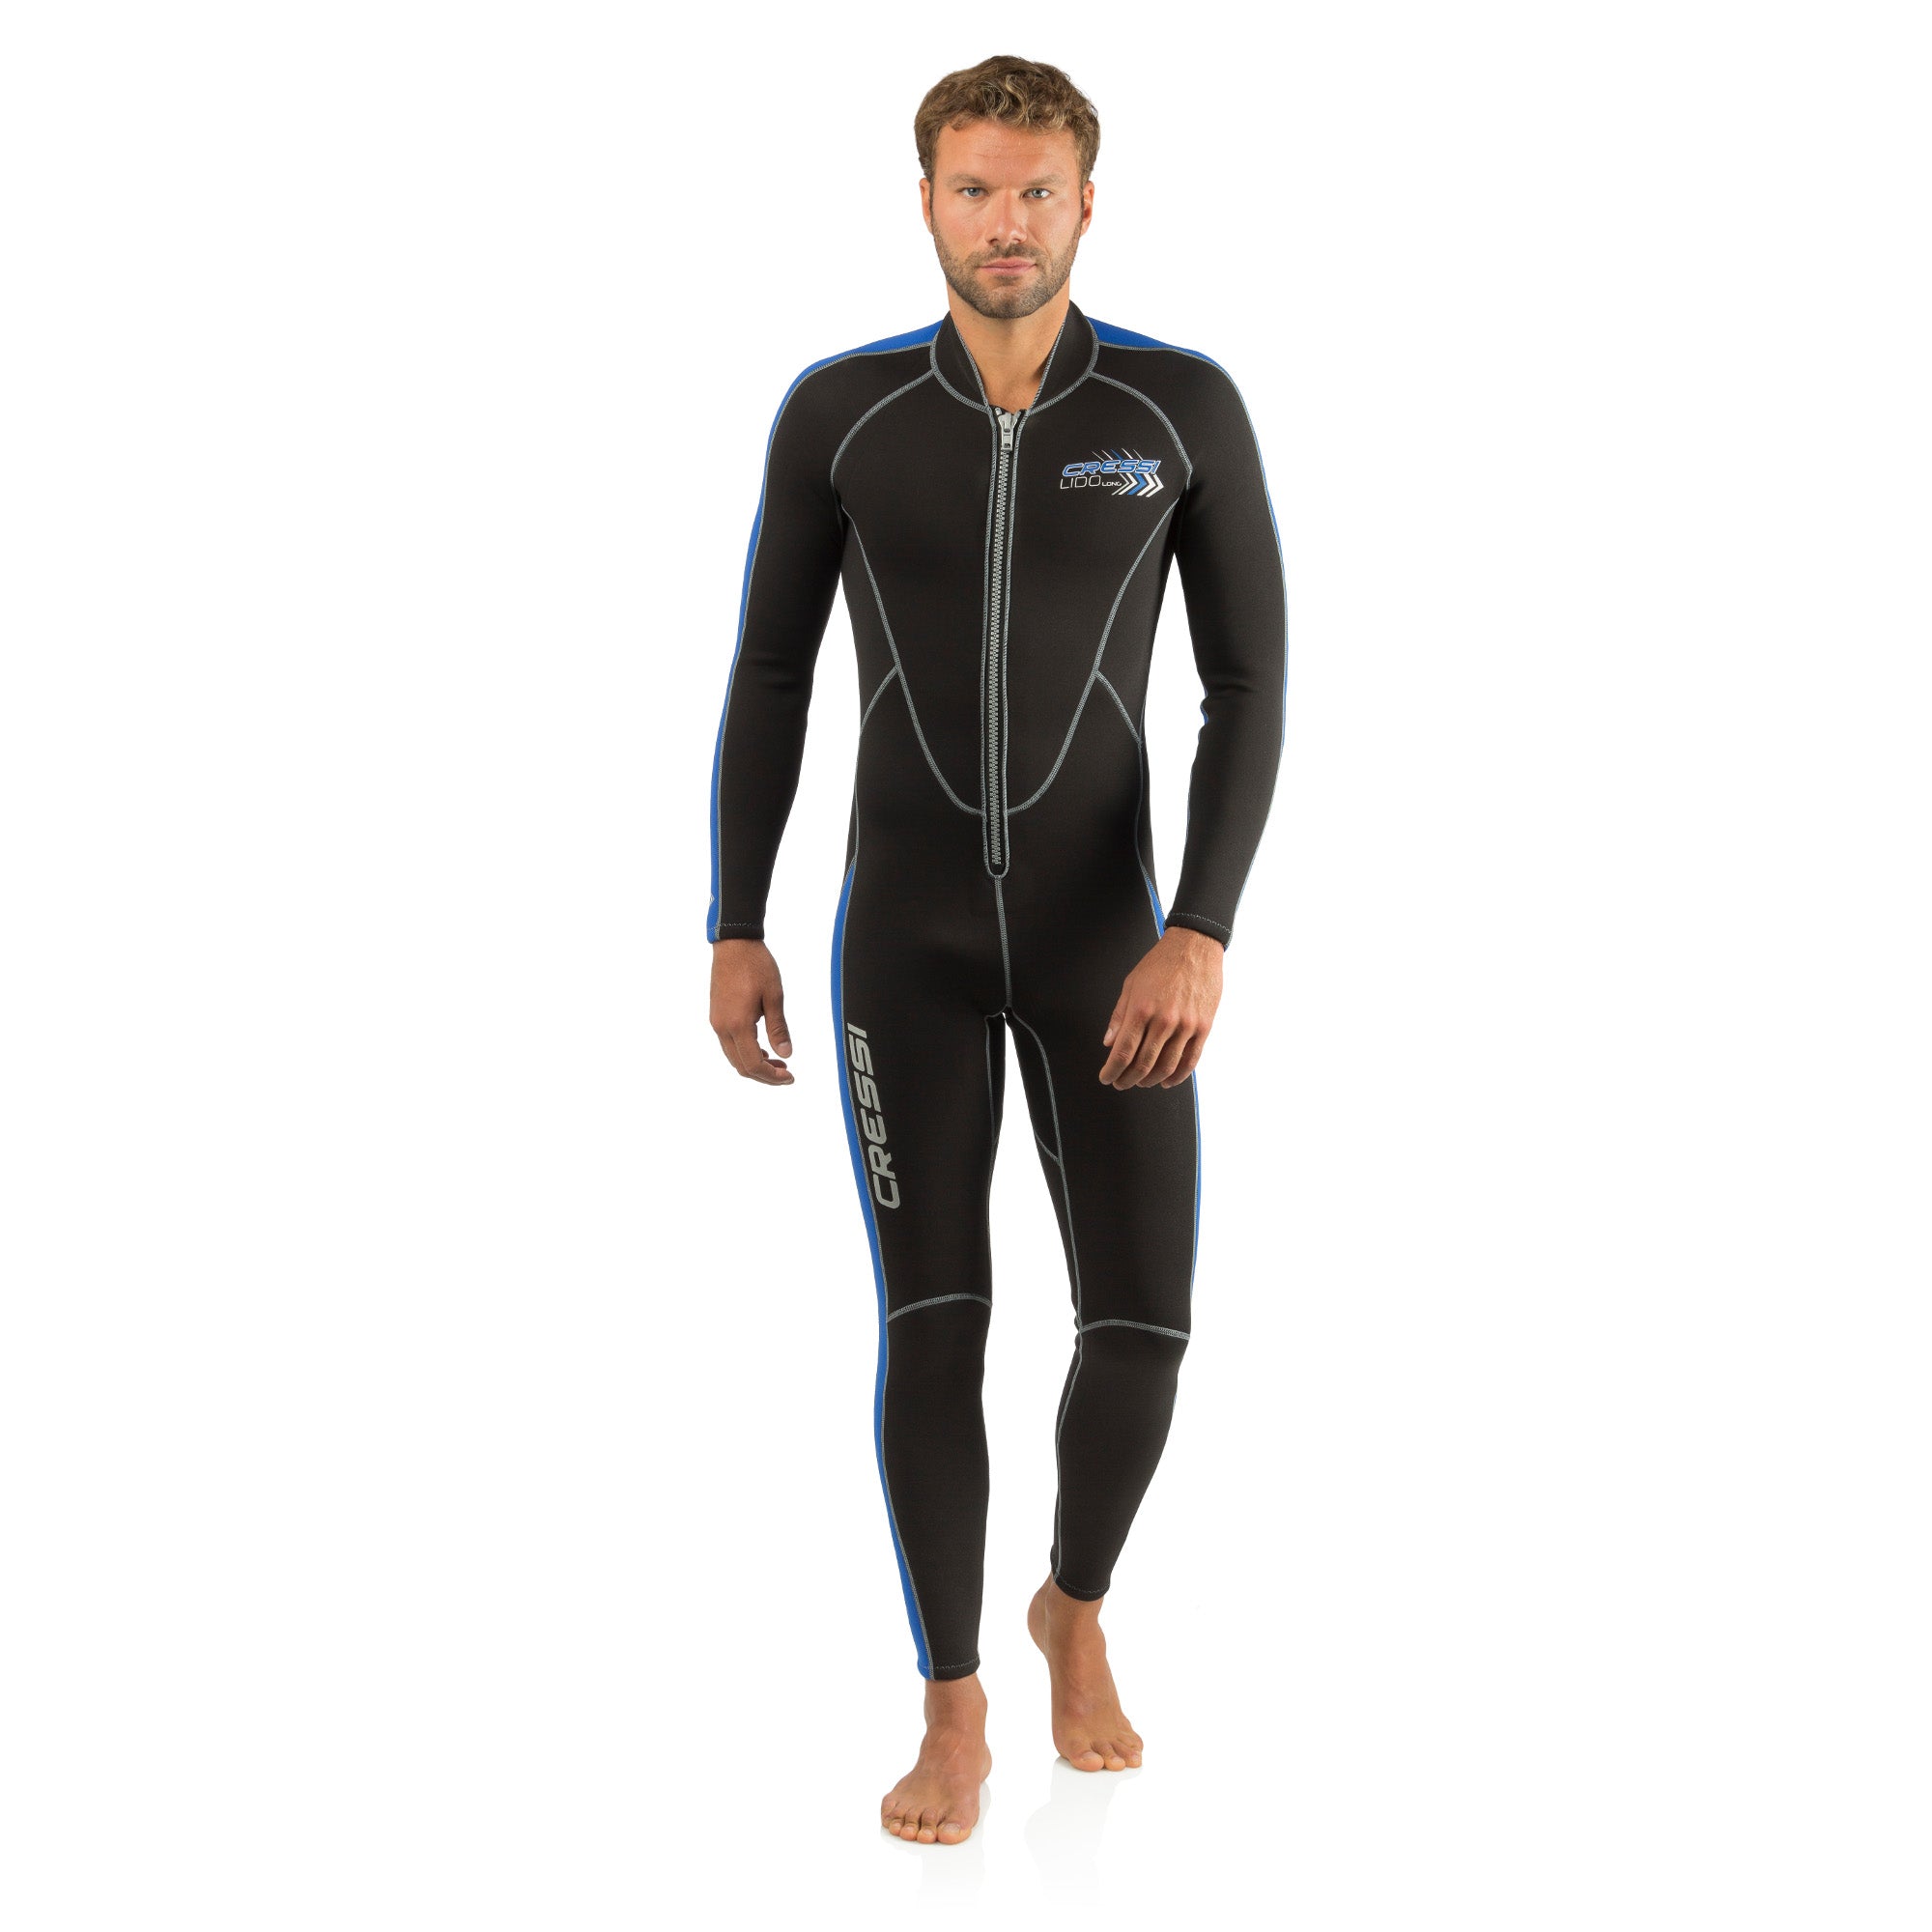 Dive wear for every BODY? Finding the right wetsuit or exposure suit